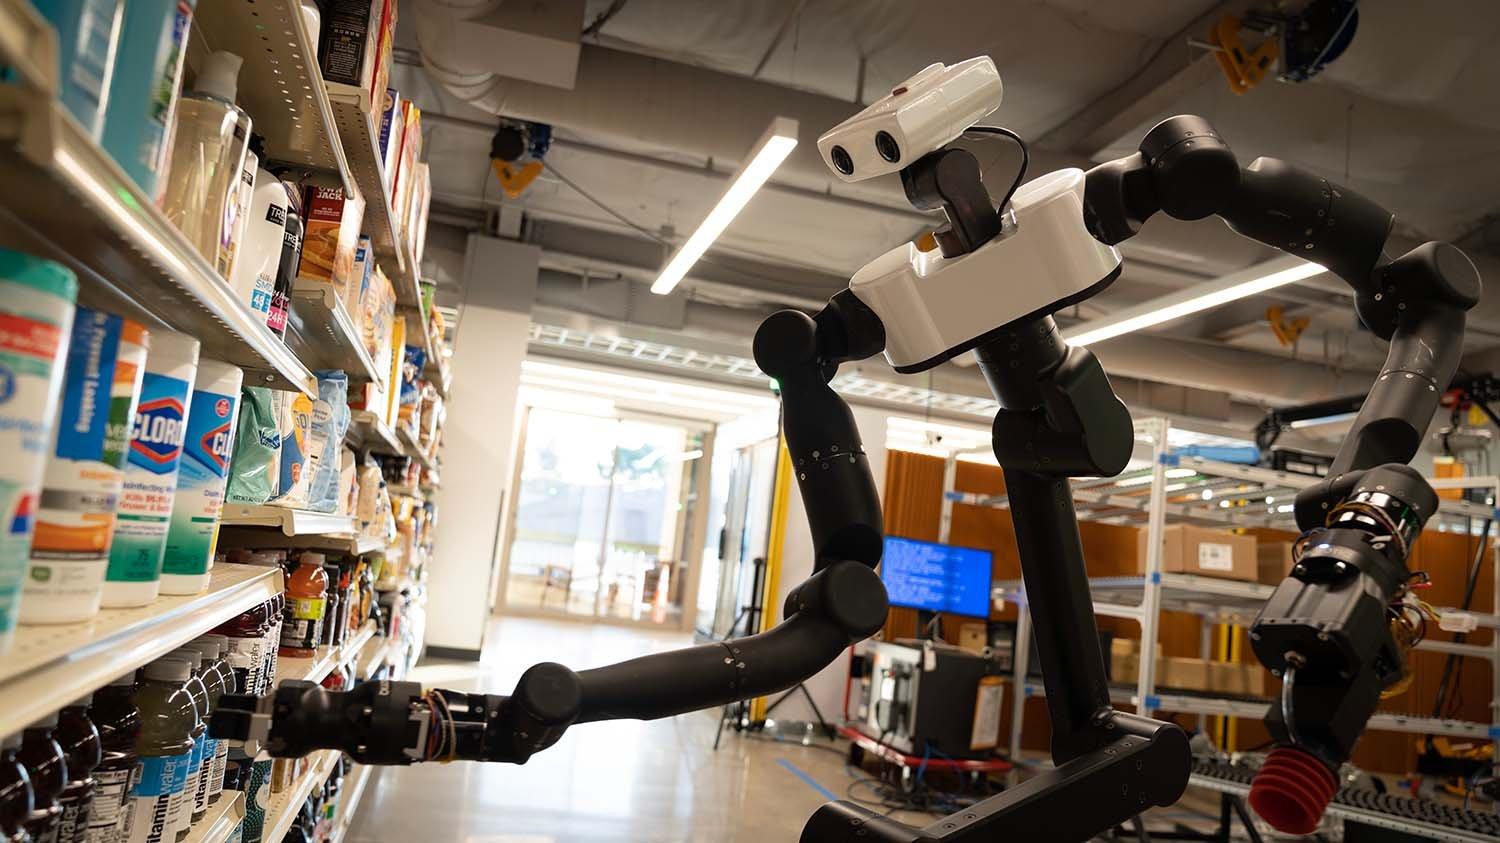 image of robot in grocery store